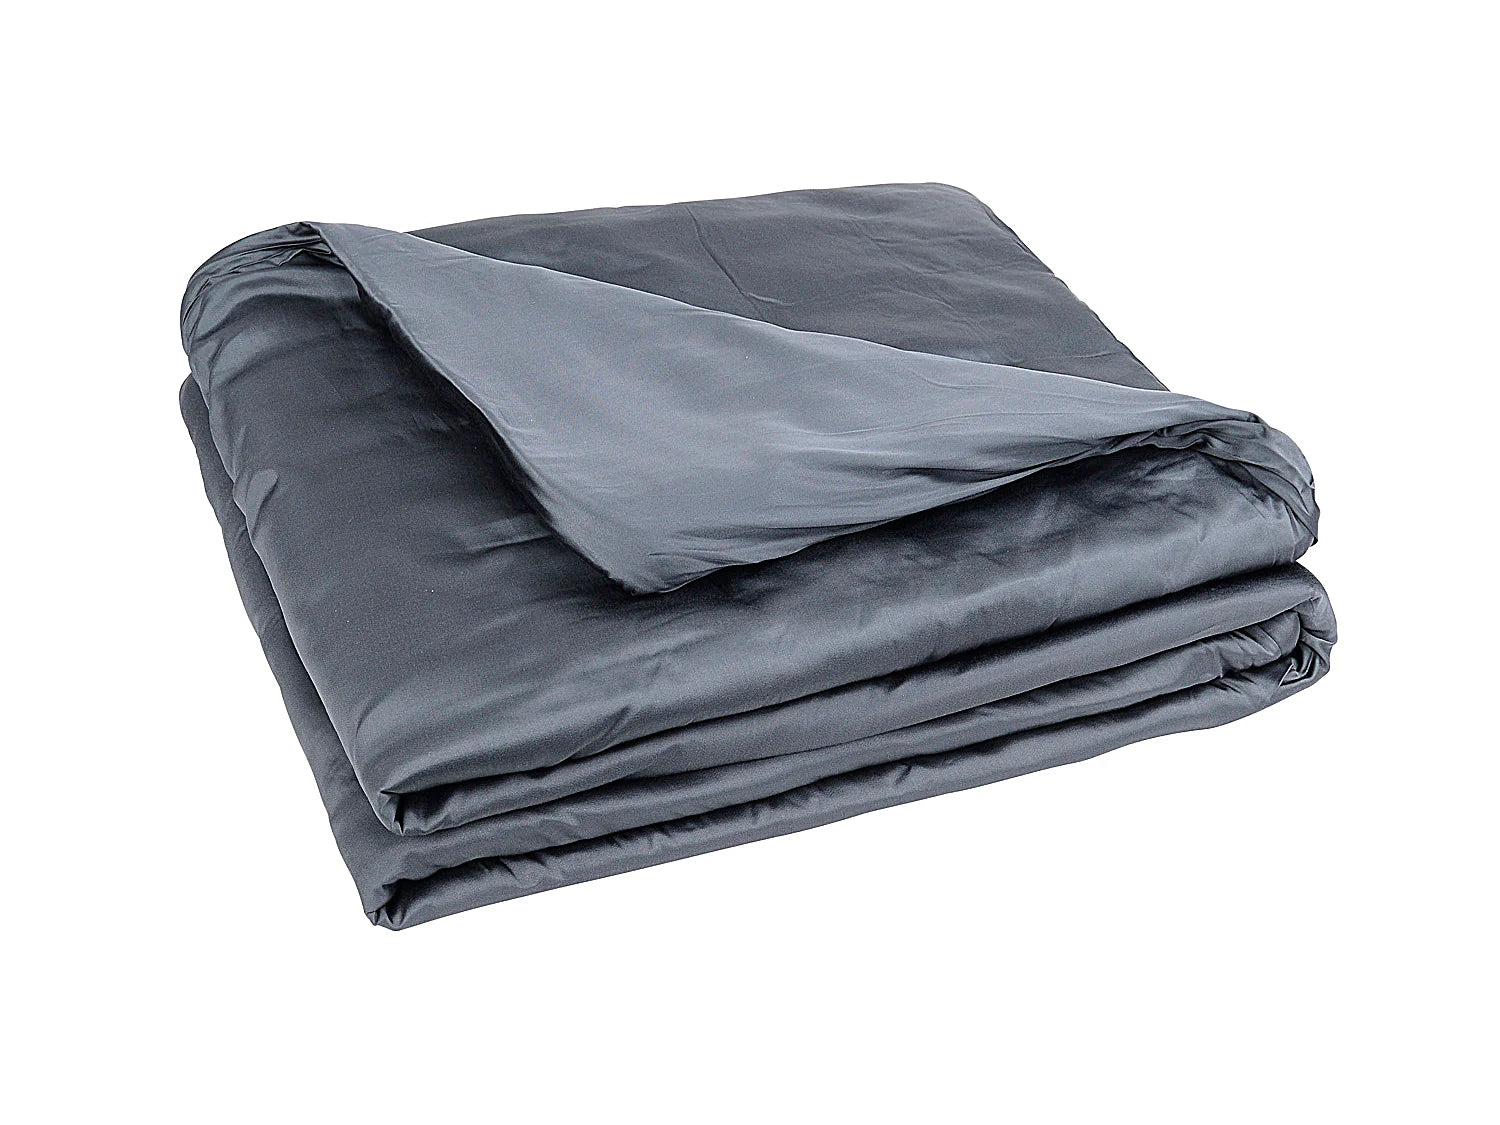 Woosah Weighted Blanket - Bamboo Cover